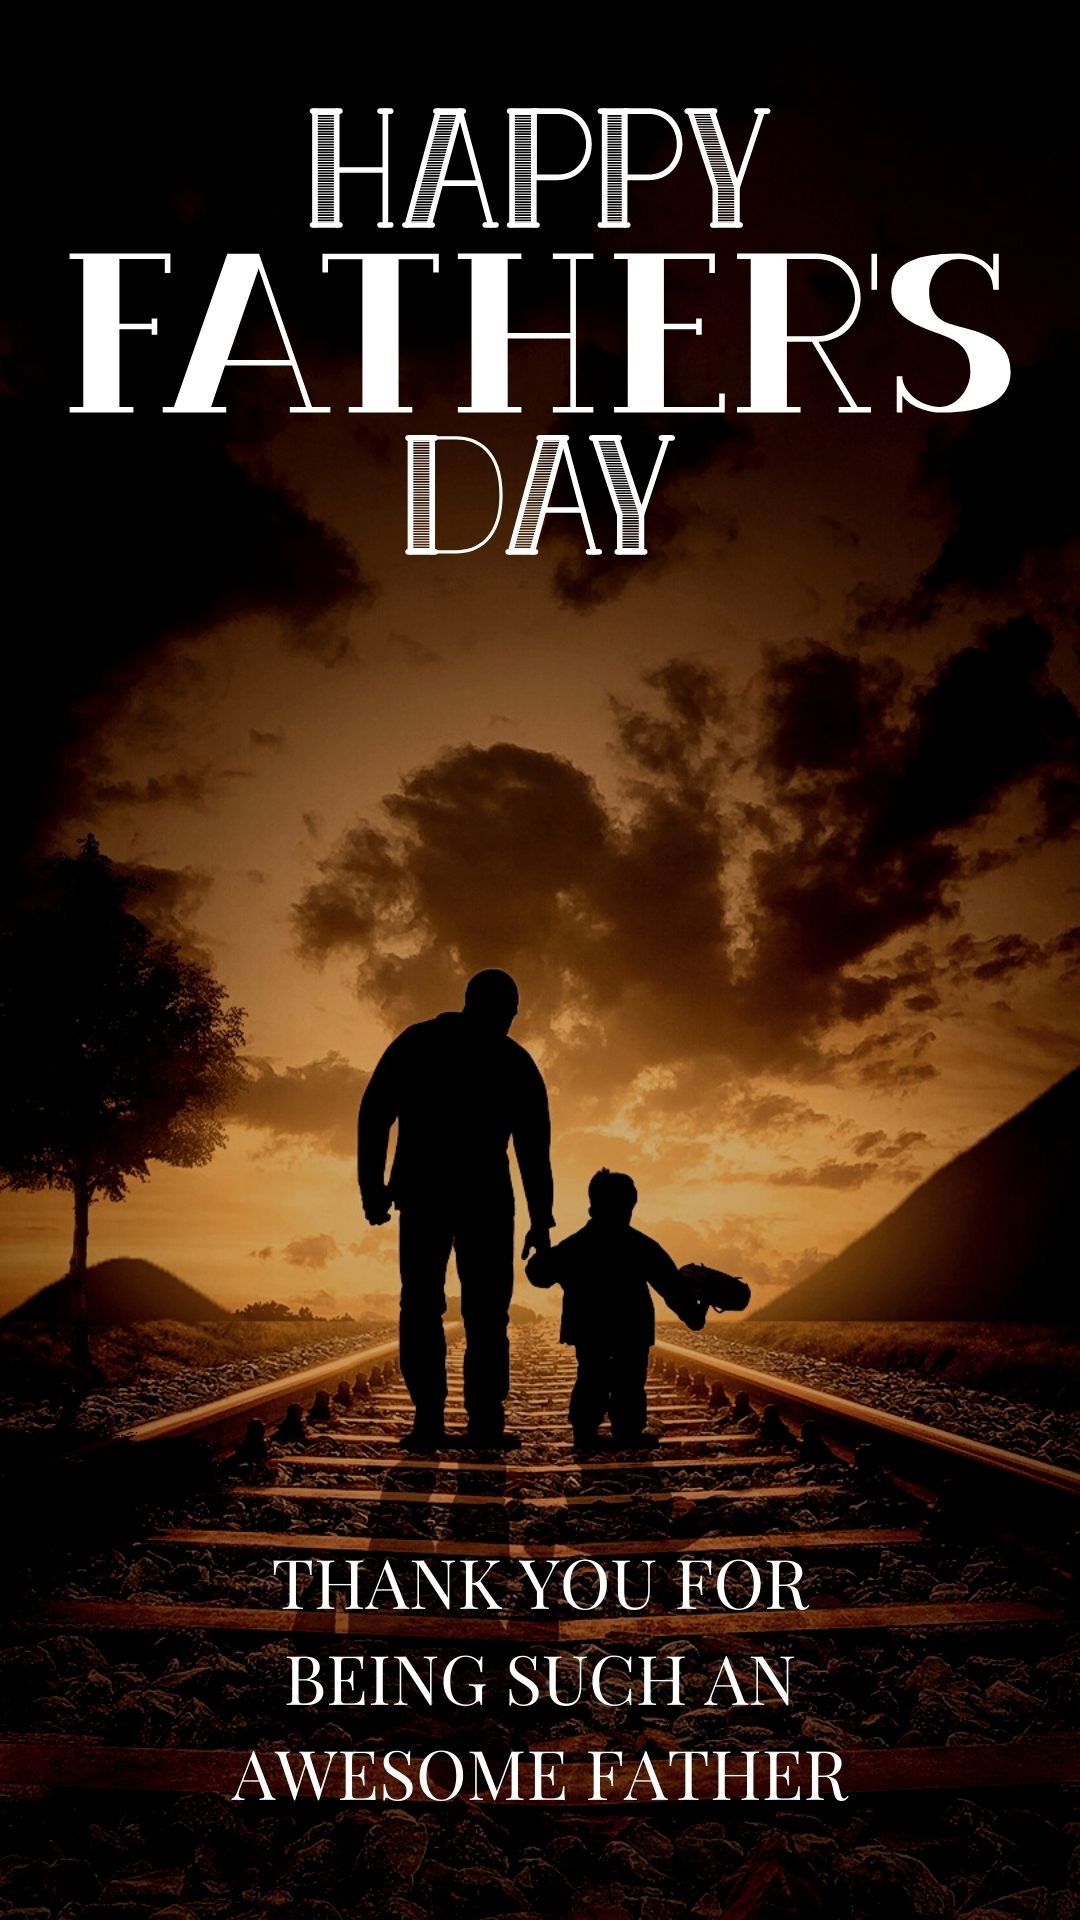 best happy father's day wishes images for instagram story (18)